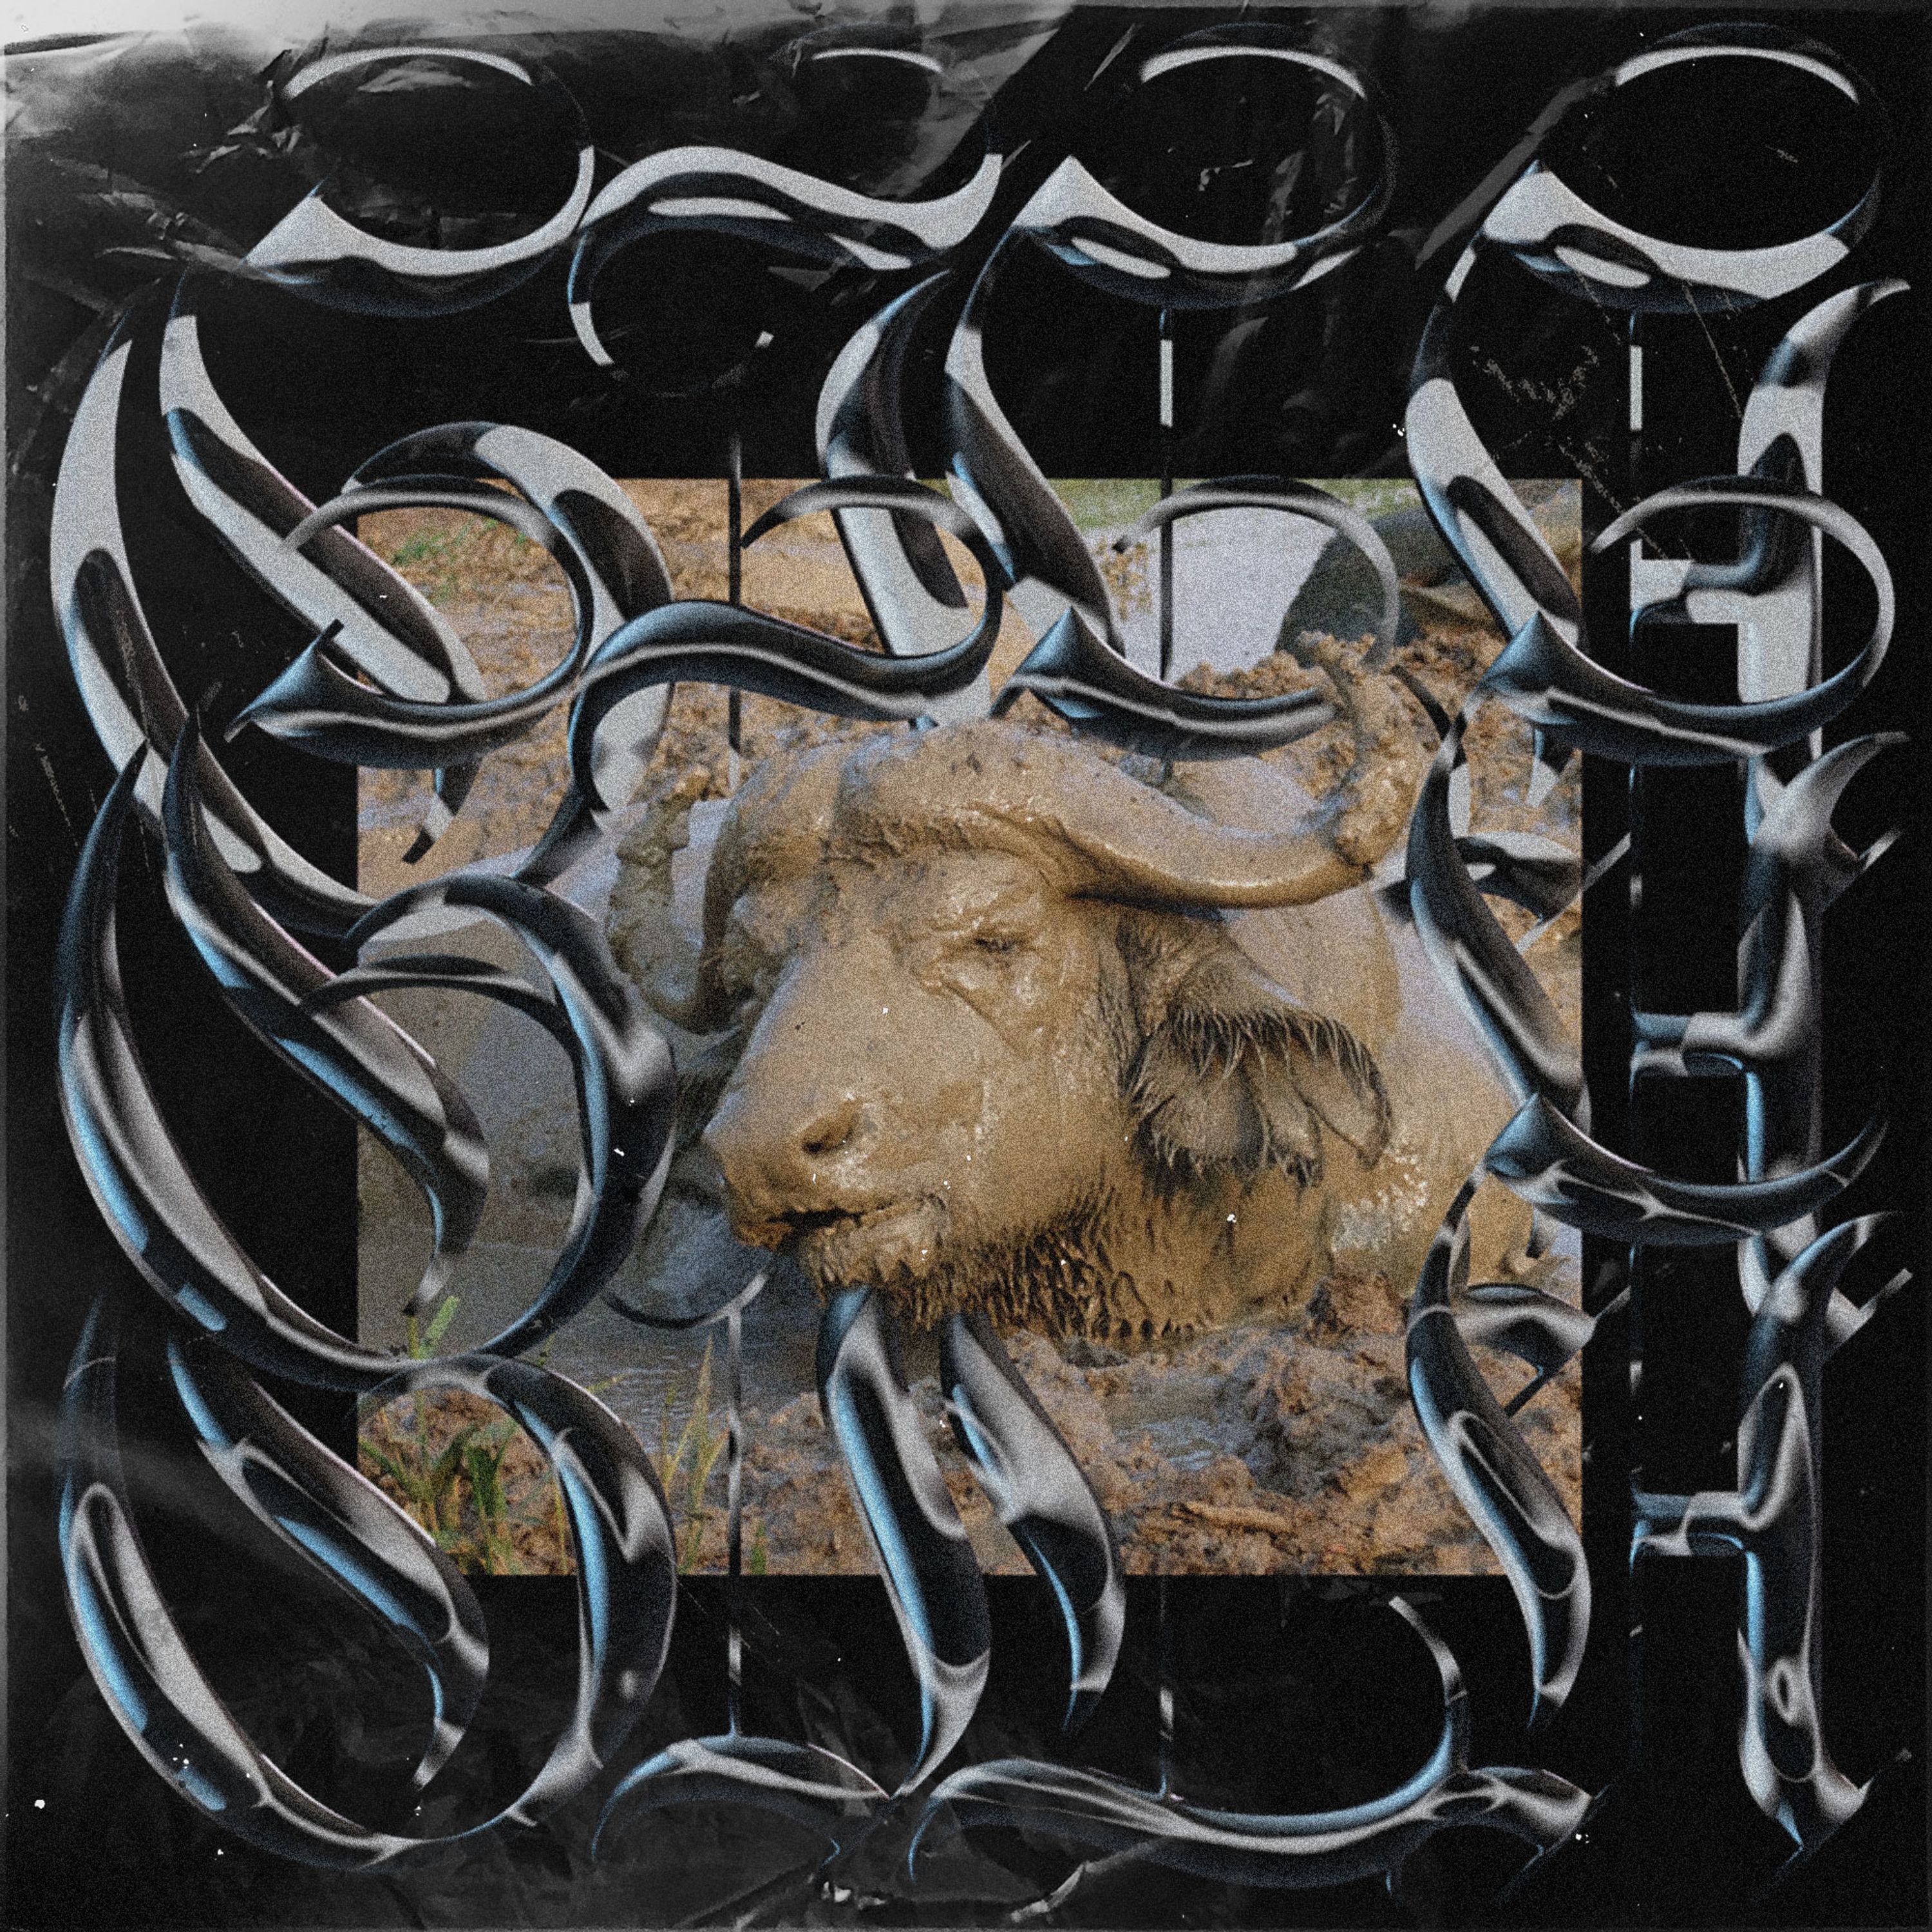 A bison in mud surrounded by metal letters.